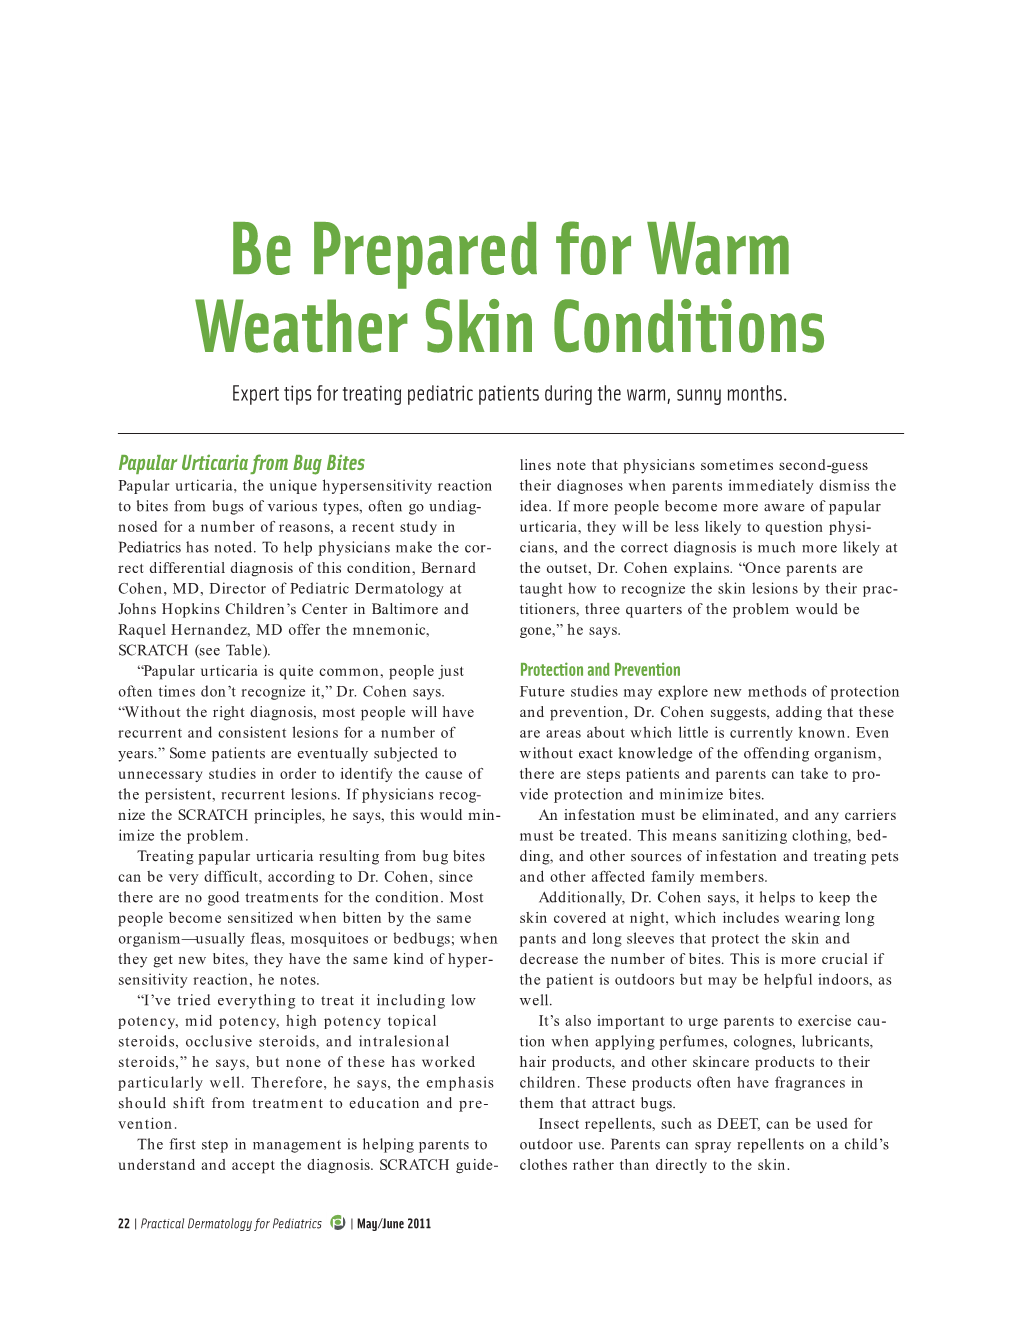 Be Prepared for Warm Weather Skin Conditions Expert Tips for Treating Pediatric Patients During the Warm, Sunny Months